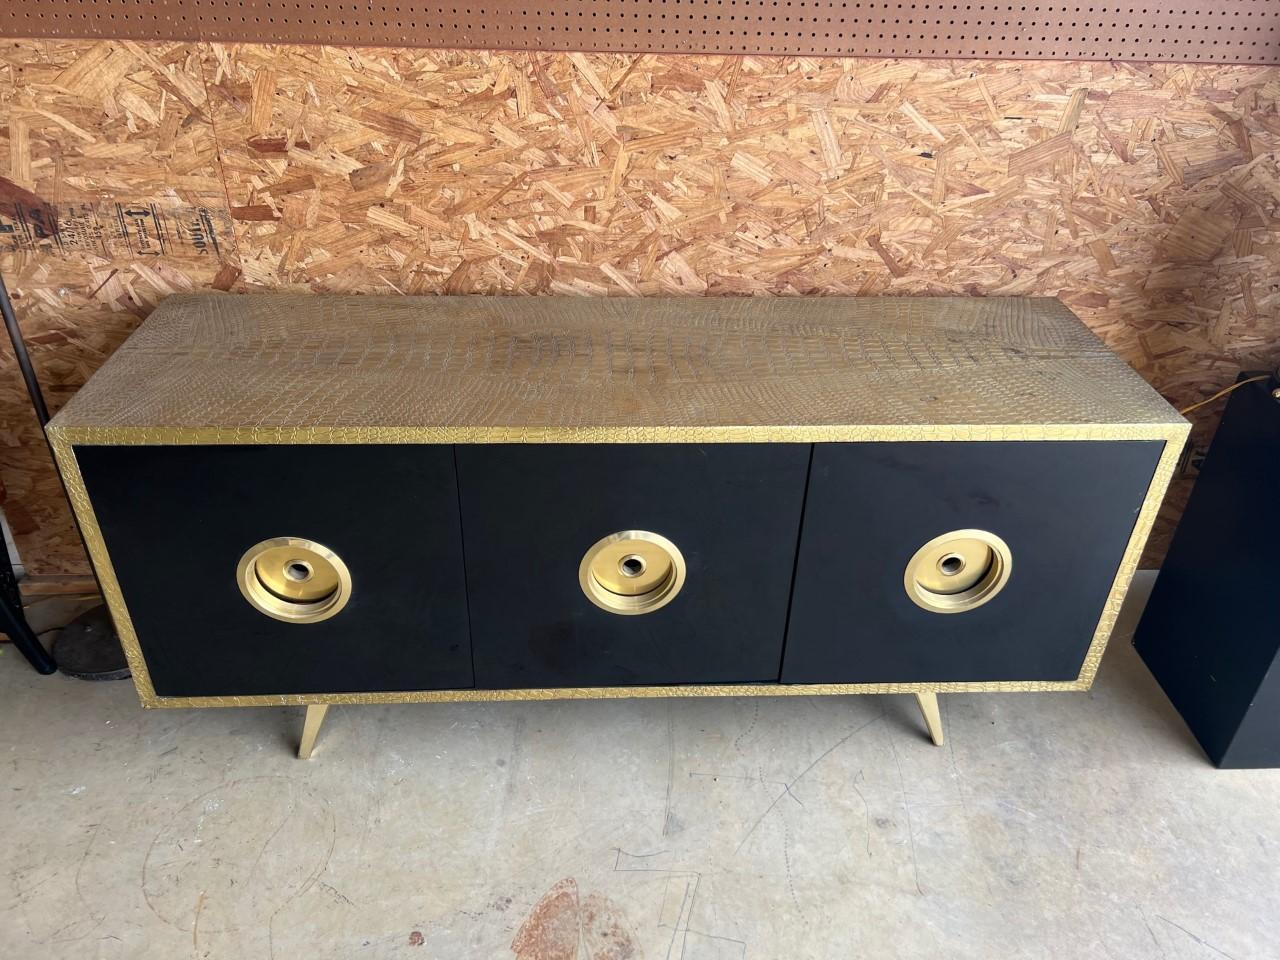 Modern crocodile design embossed brass sideboard with three drawers and three doors cover with black resin finish.

No Shelves

Condition:
Some light imperfection de-lamination
Brass finish 
Crystal coated on resin.